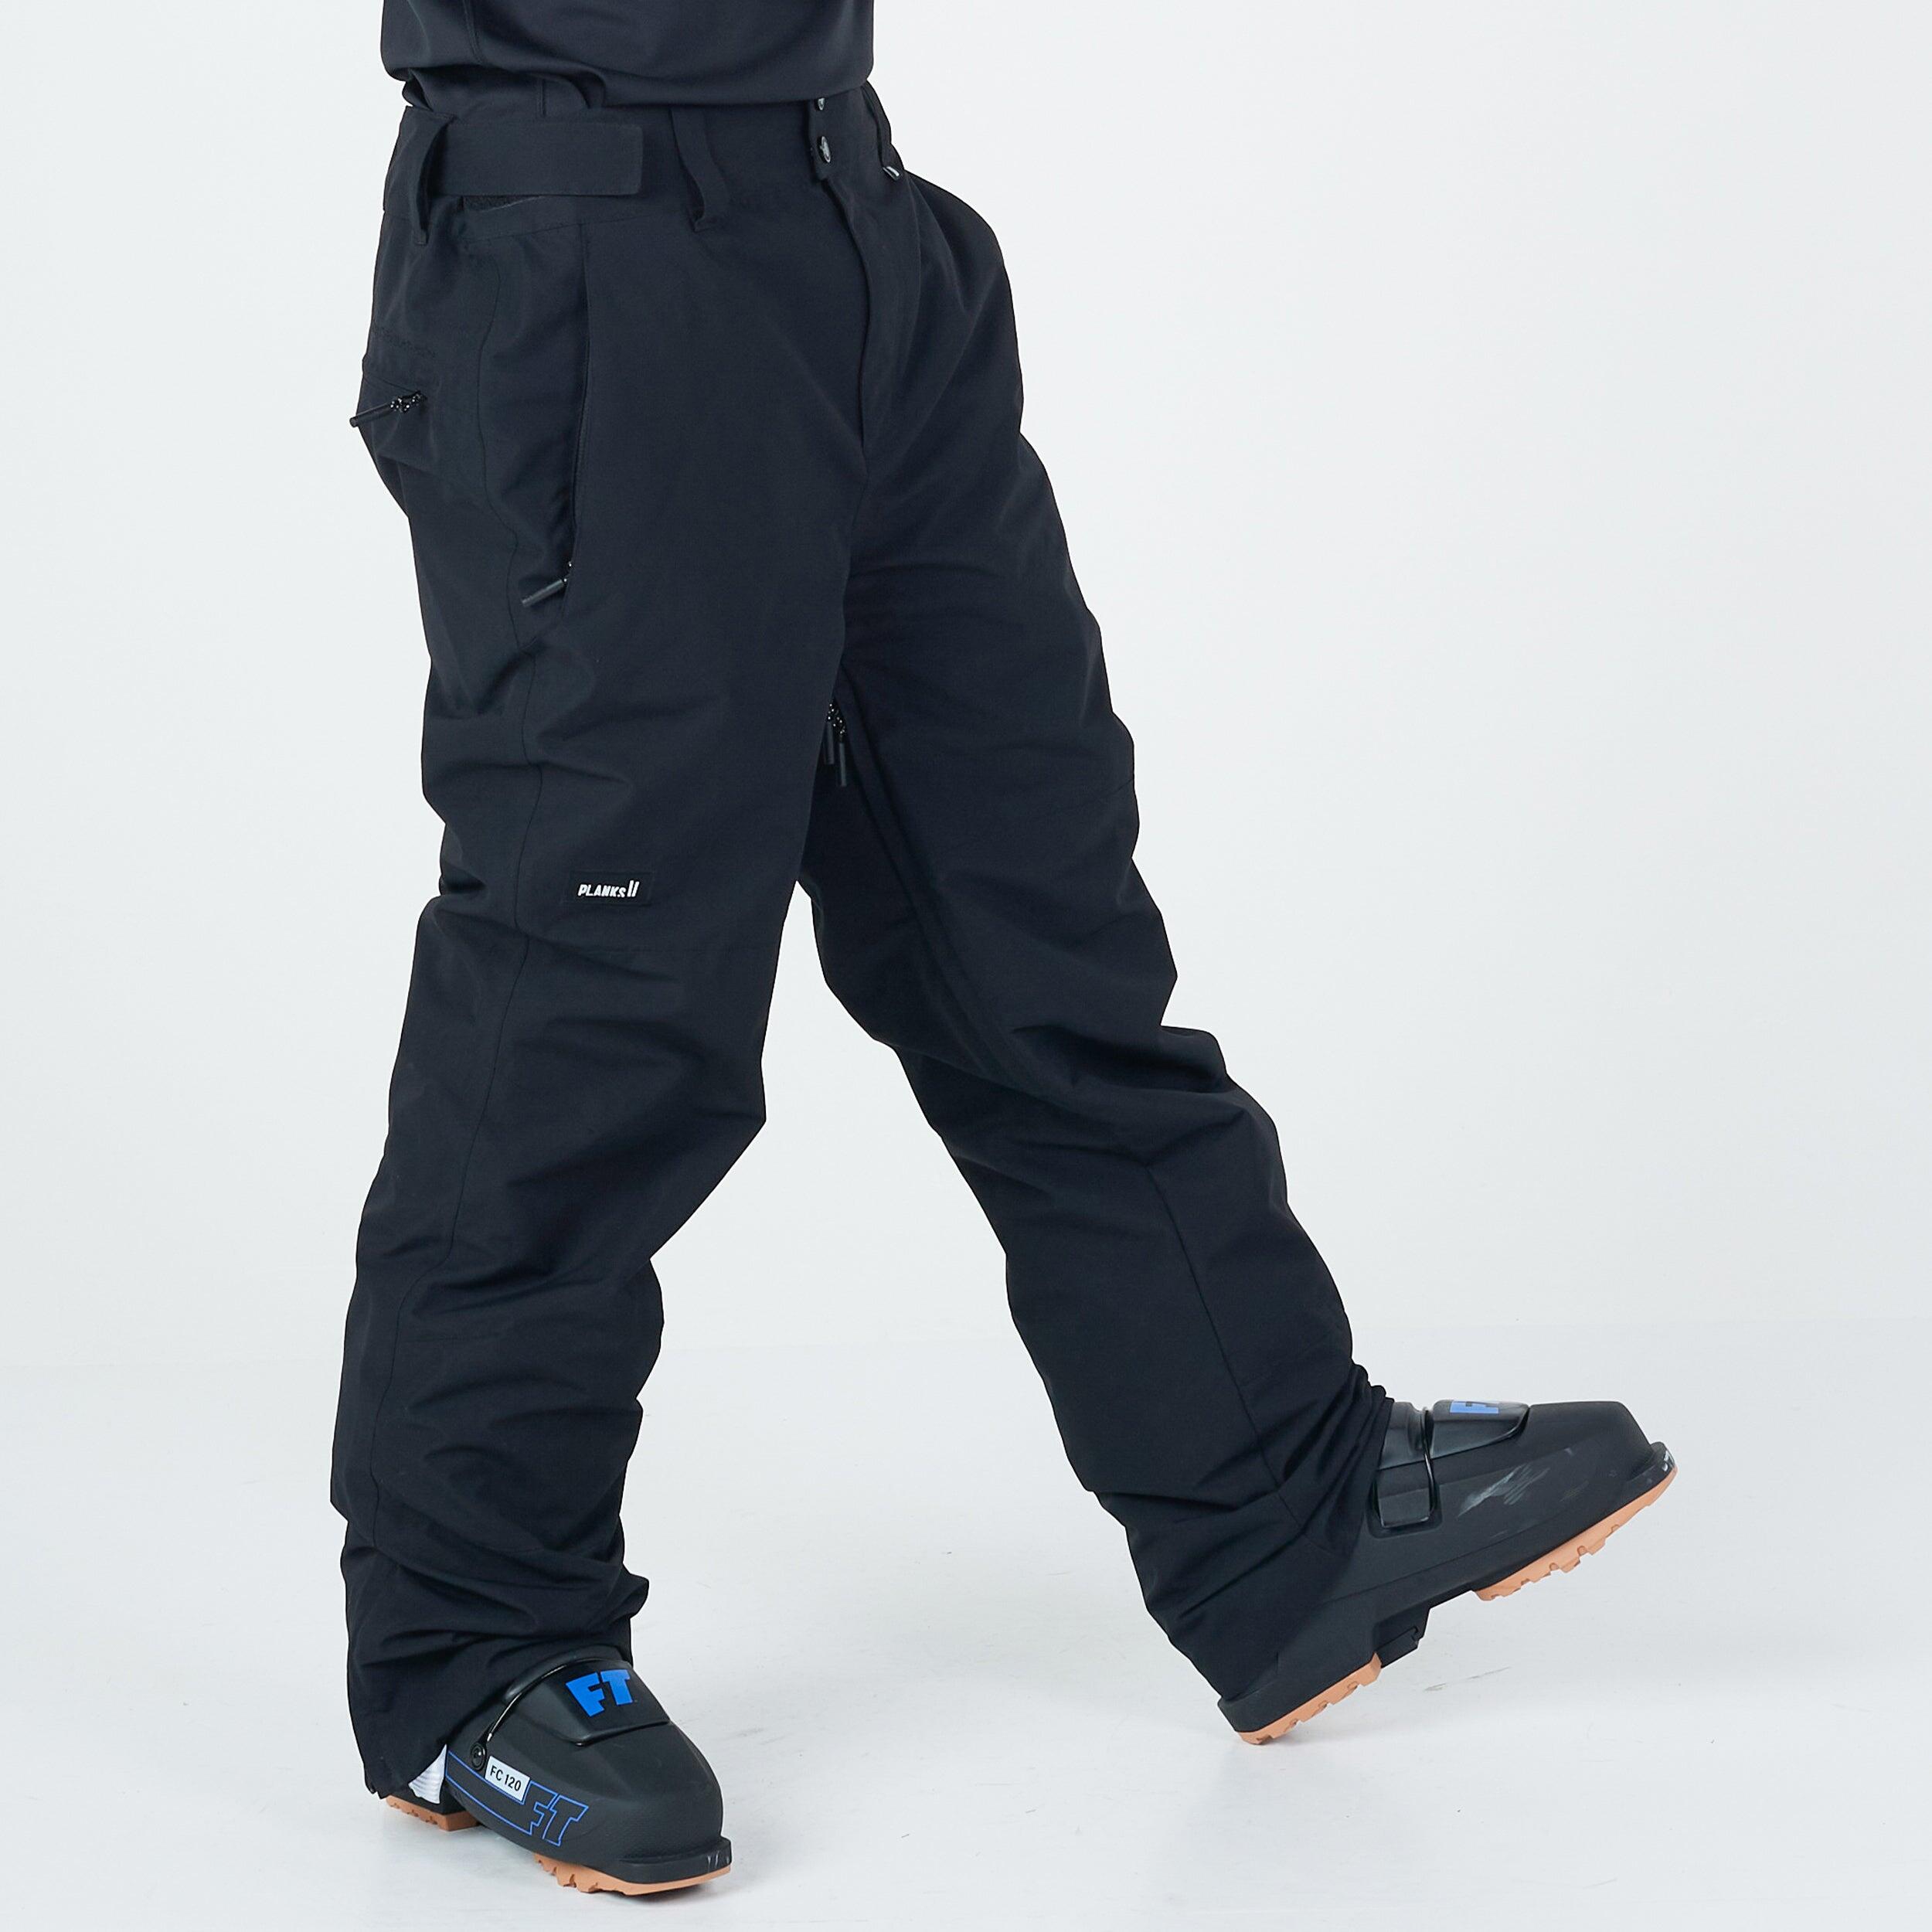 Planks Easy Rider Men's Ski Pants in Black with Pockets - Breathable Trousers 4/6